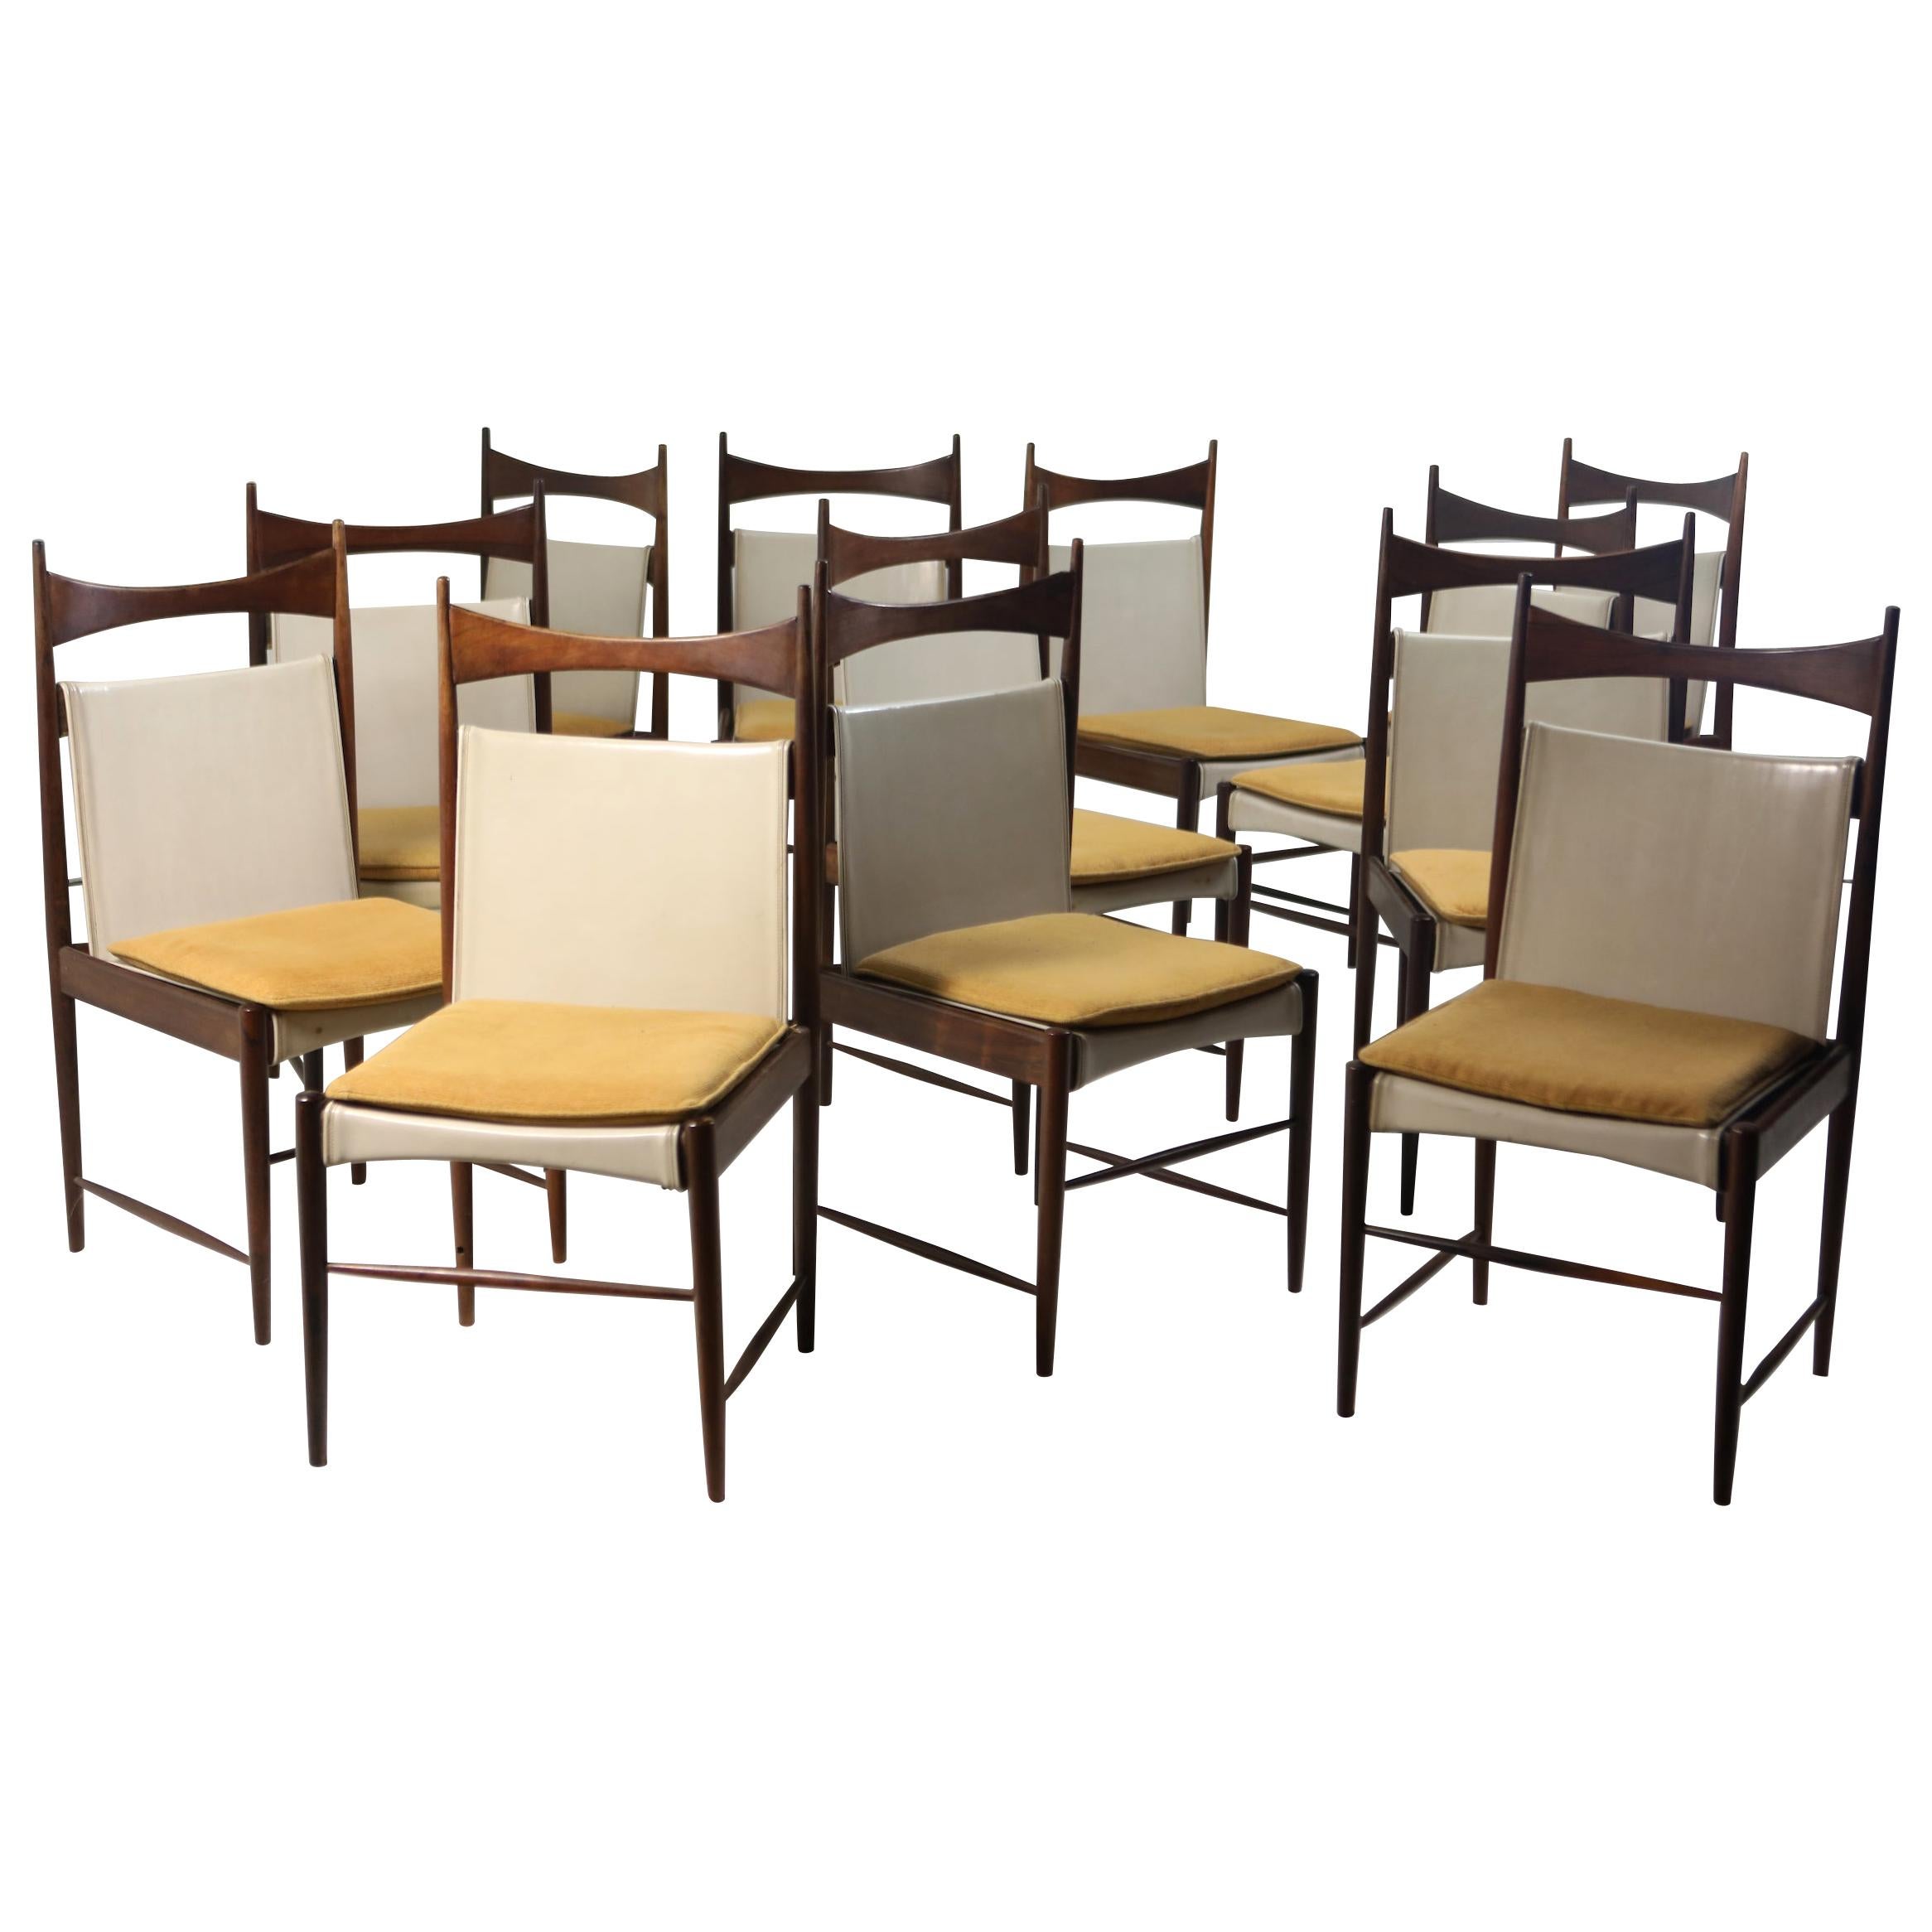 Set of 12 Mid-Century Modern Cantu Alta "Tall Chairs" by Sergio Rodrigues, 1950s